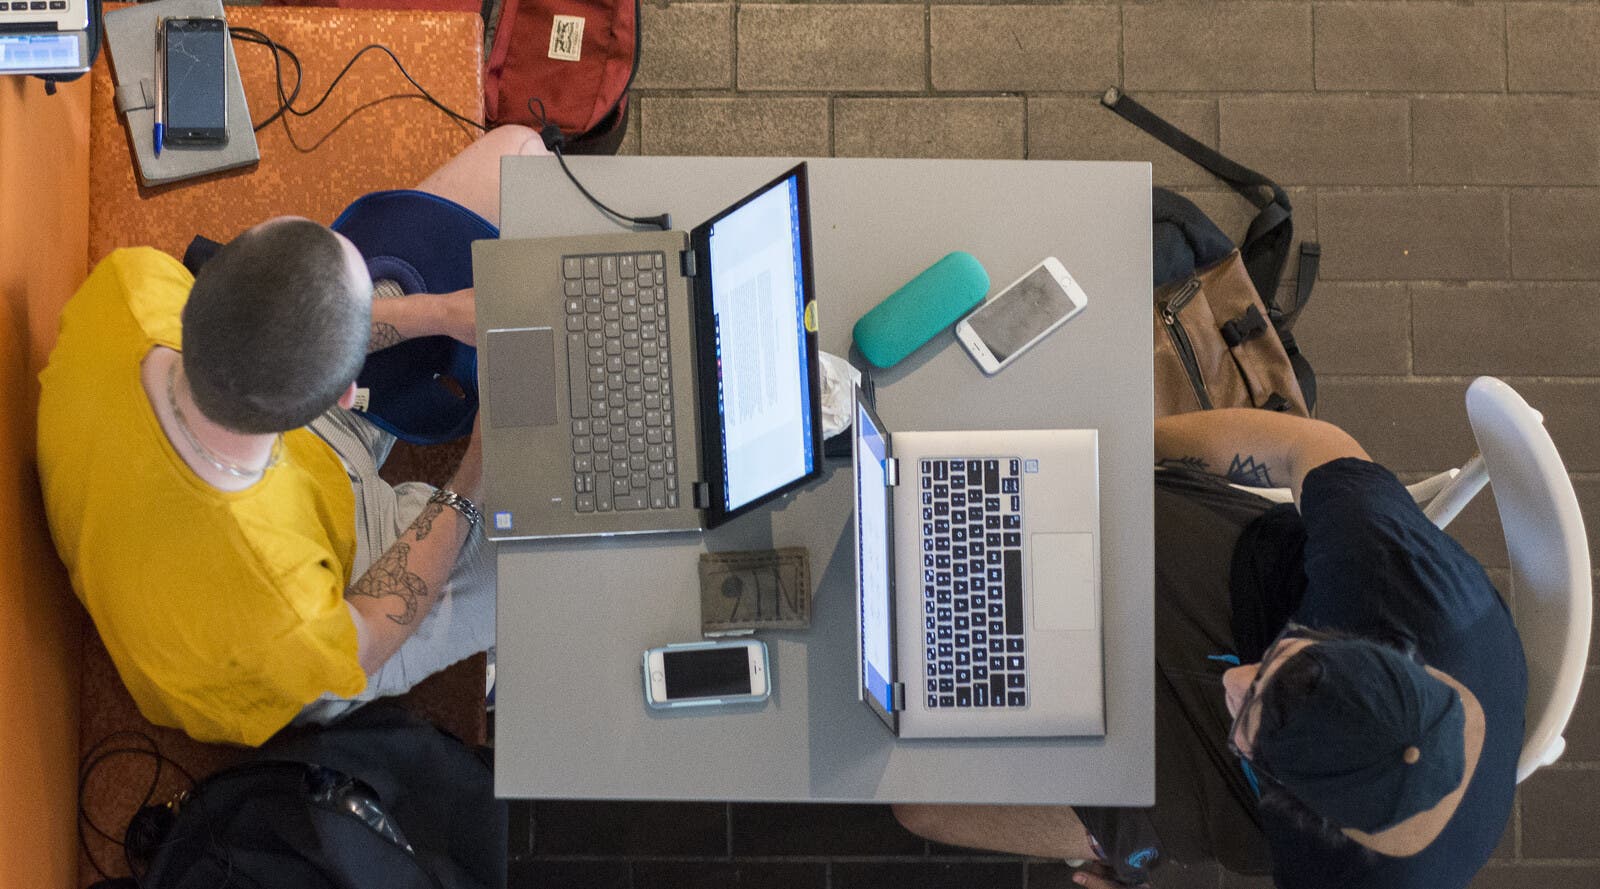 Students studying remotely on laptops in a cafe